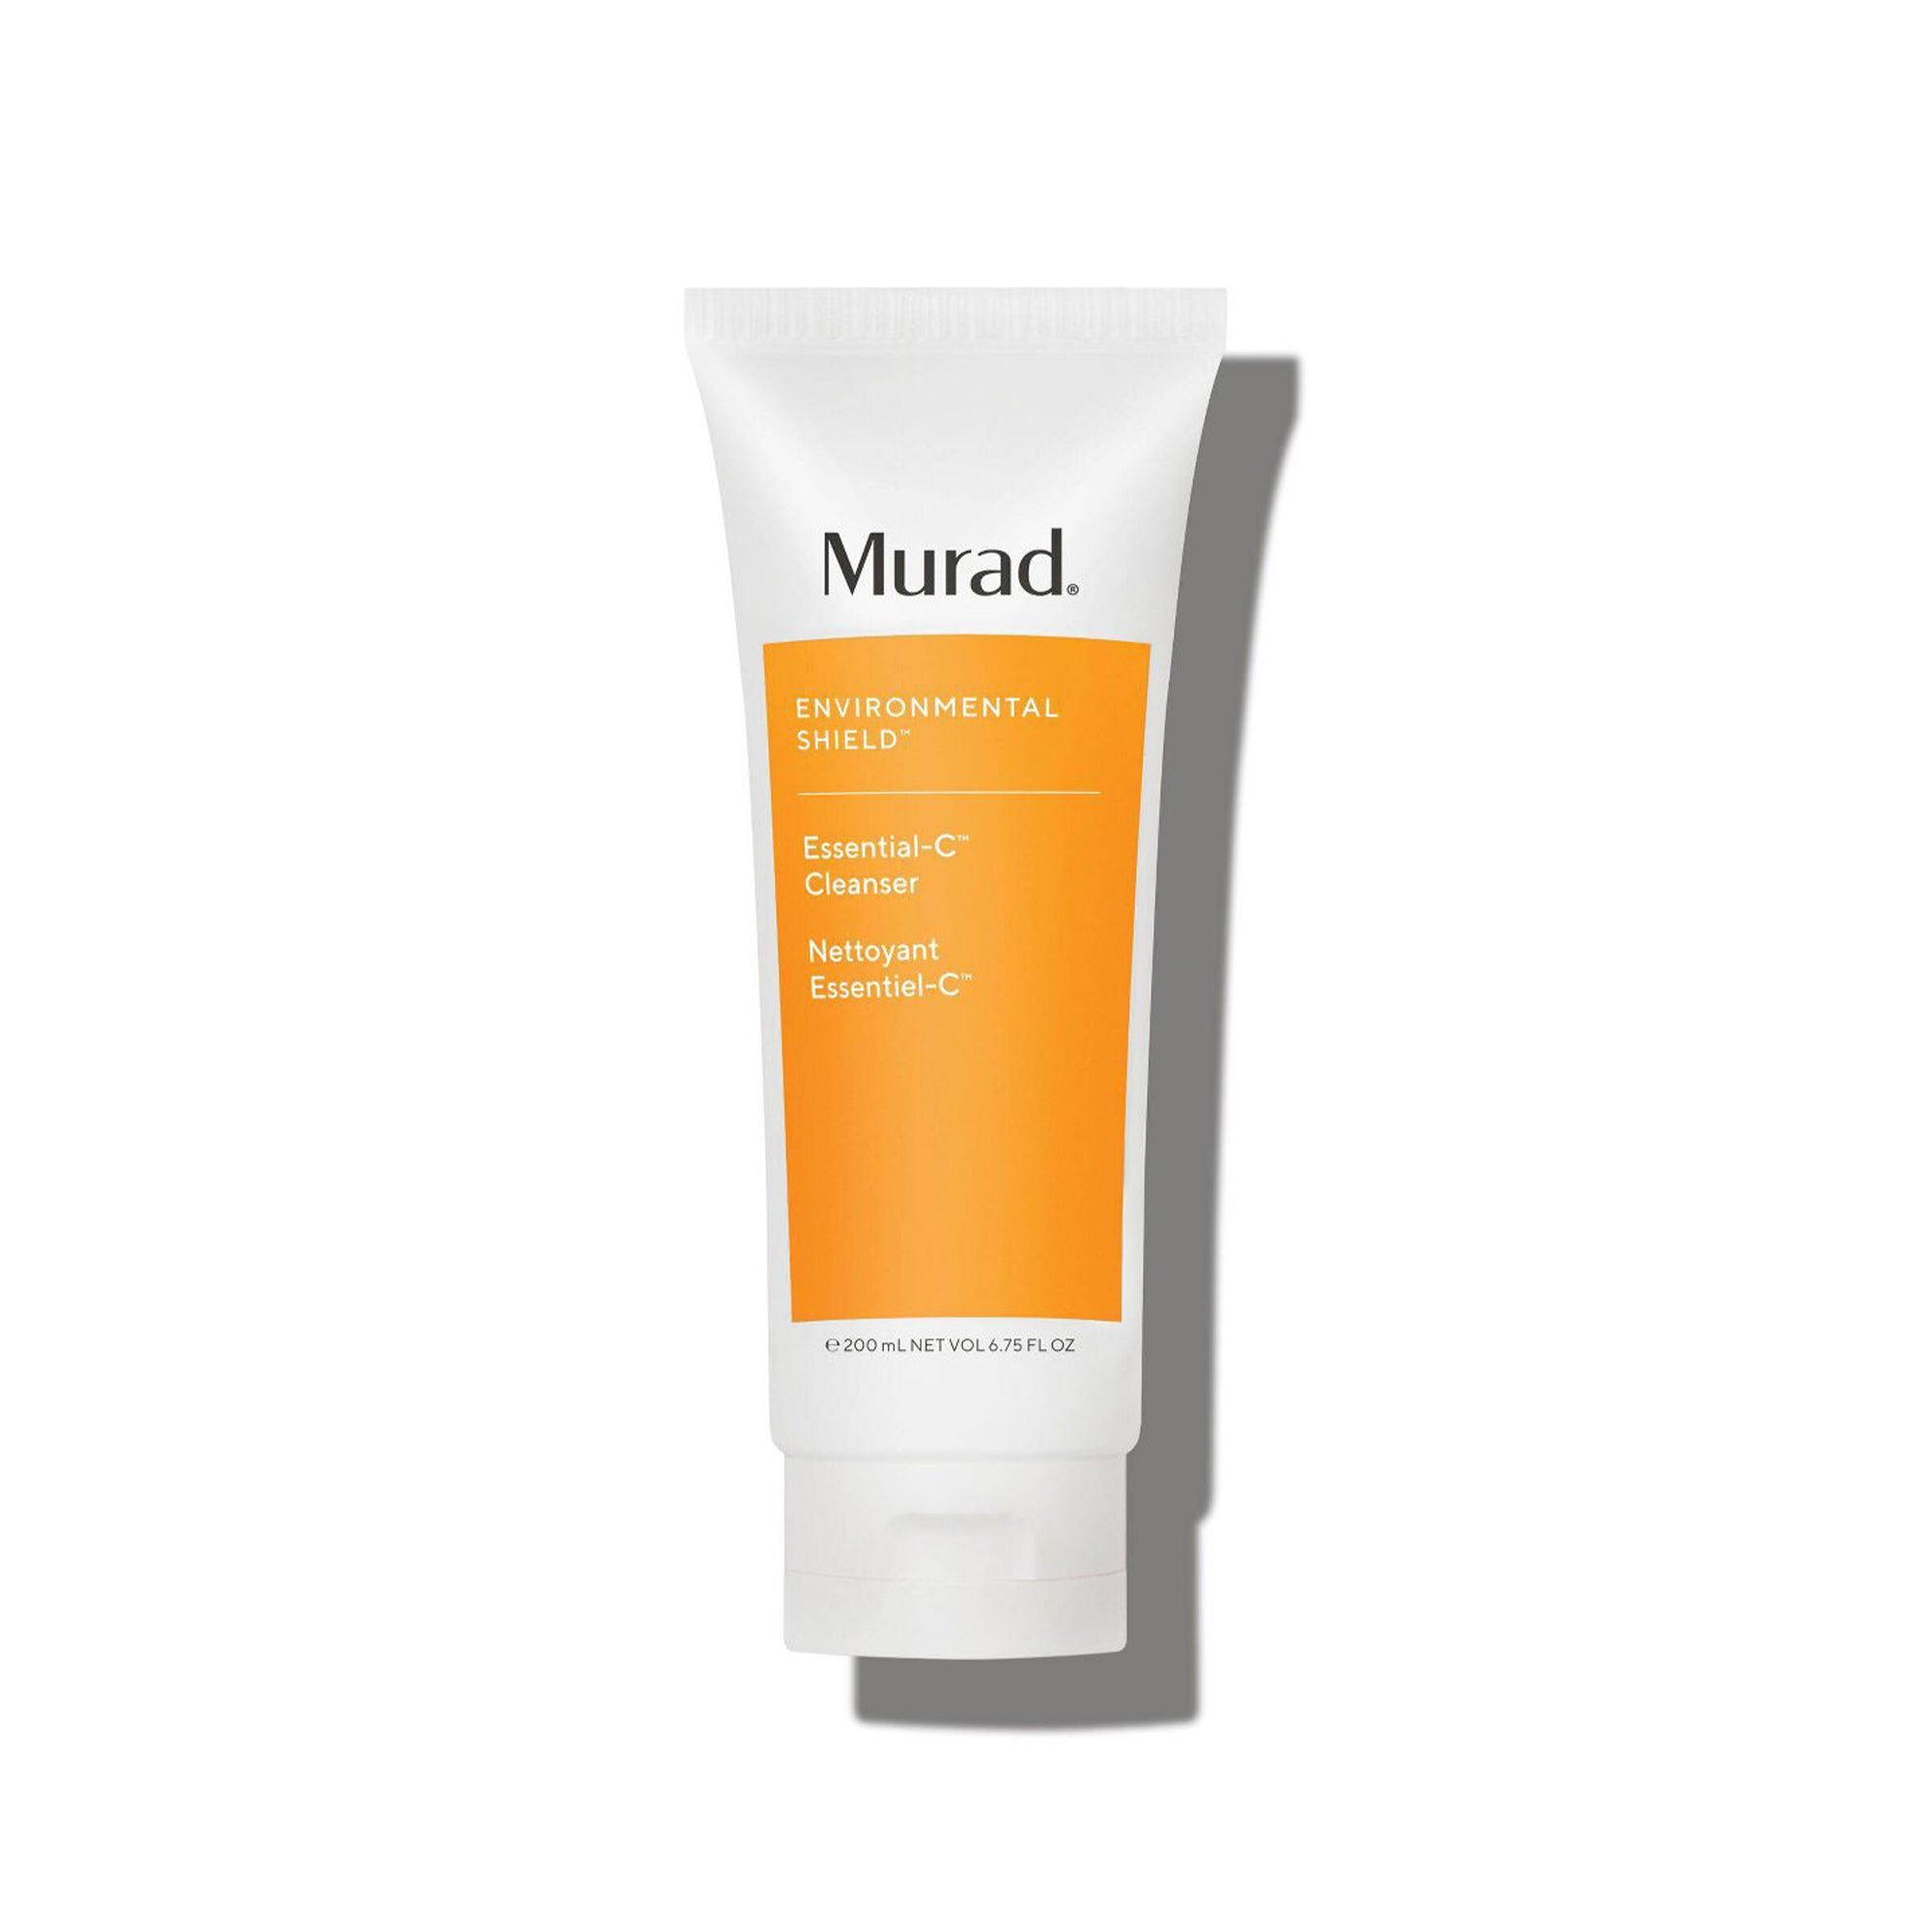 Murad Essential-C Cleanser, Deep Cleansing, Vitaming Rich and Energizing Facial Cleanser, 6.7 oz